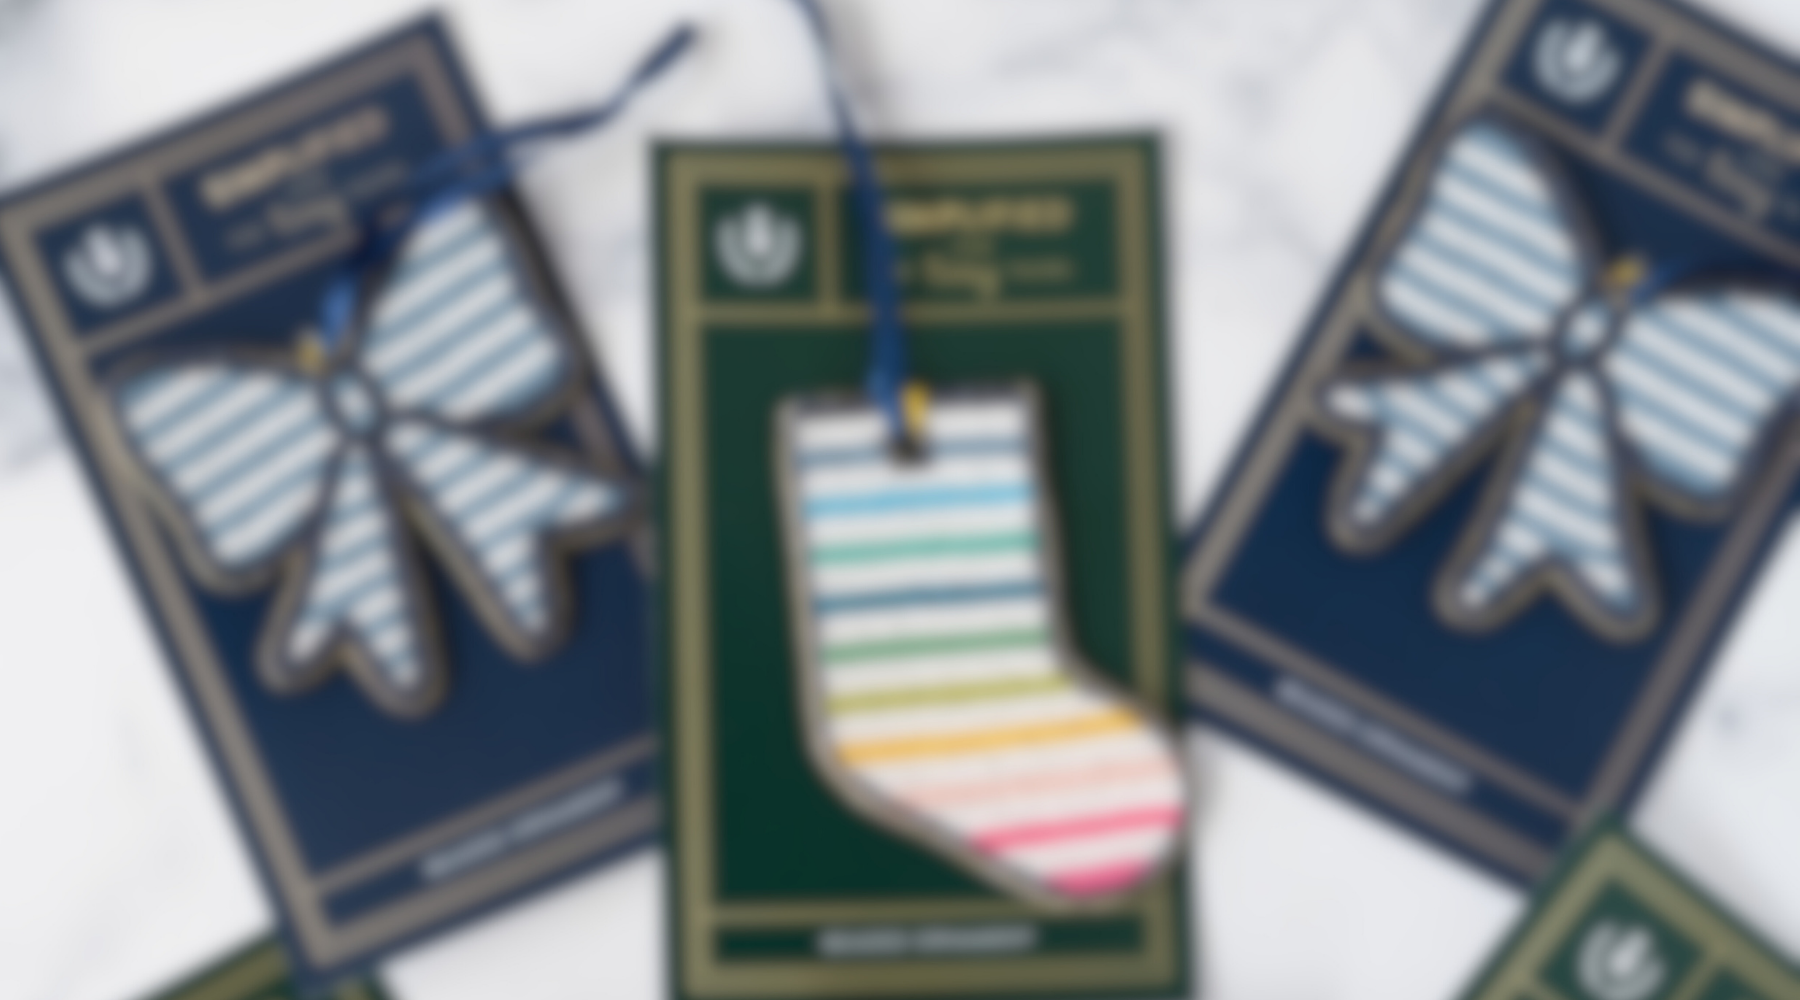 Blurred photo of blue and white striped bows on either side of a rainbow striped stocking